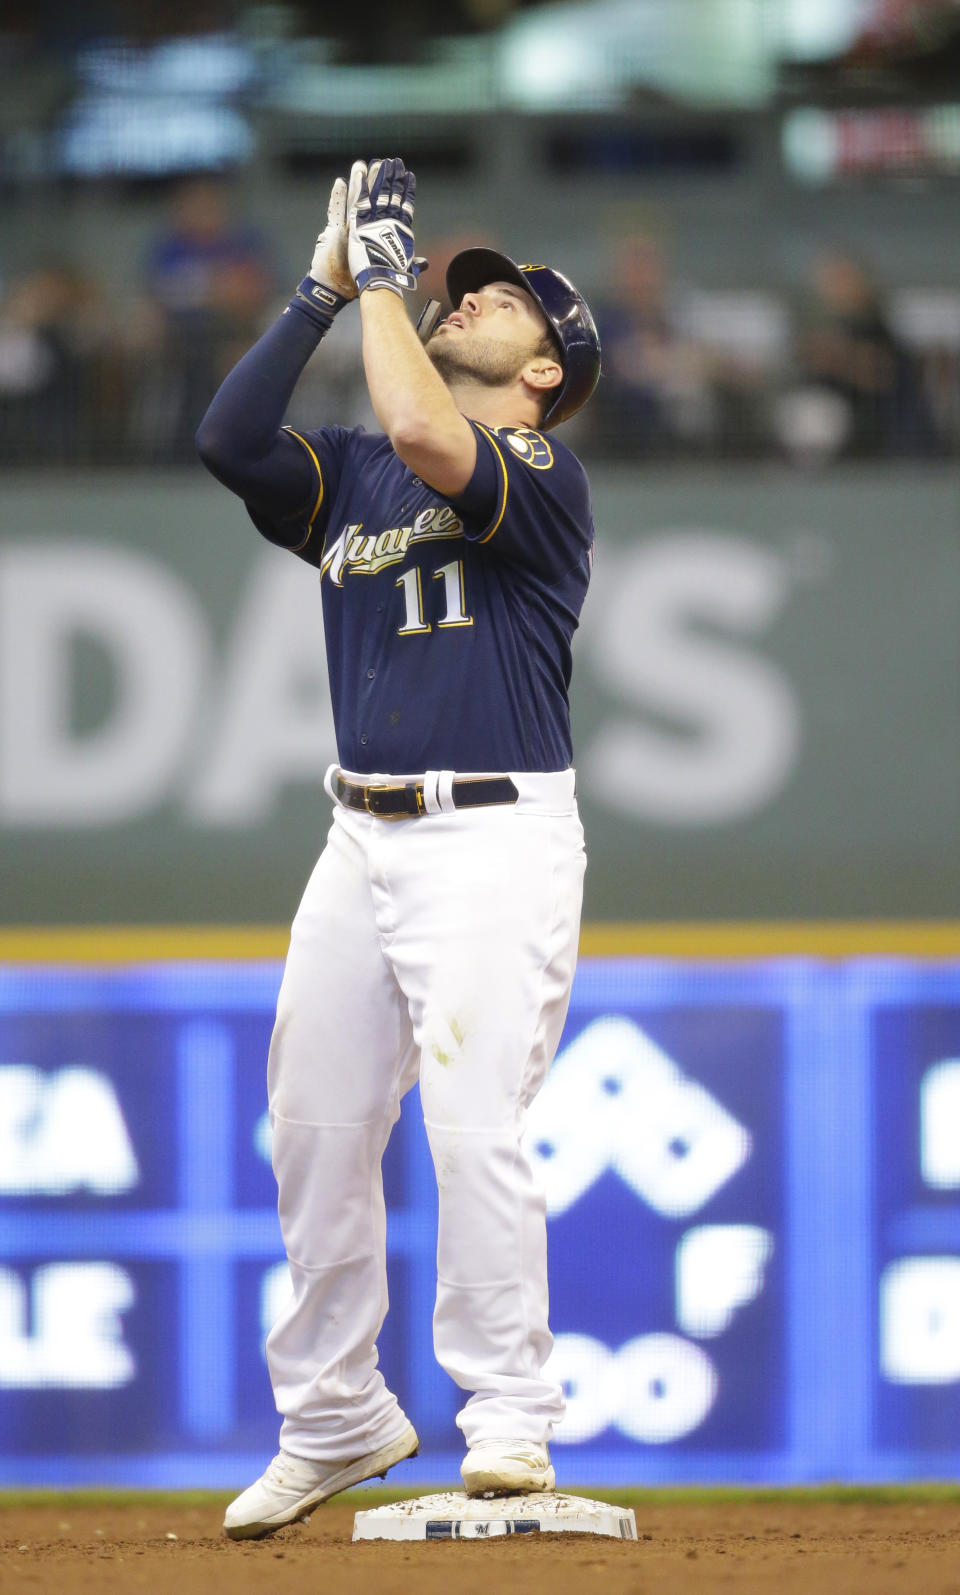 Milwaukee Brewers' Mike Moustakas reacts after his run-scoring double during the third inning of a baseball game Saturday, May 4, 2019, in Milwaukee. (AP Photo/Jeffrey Phelps)